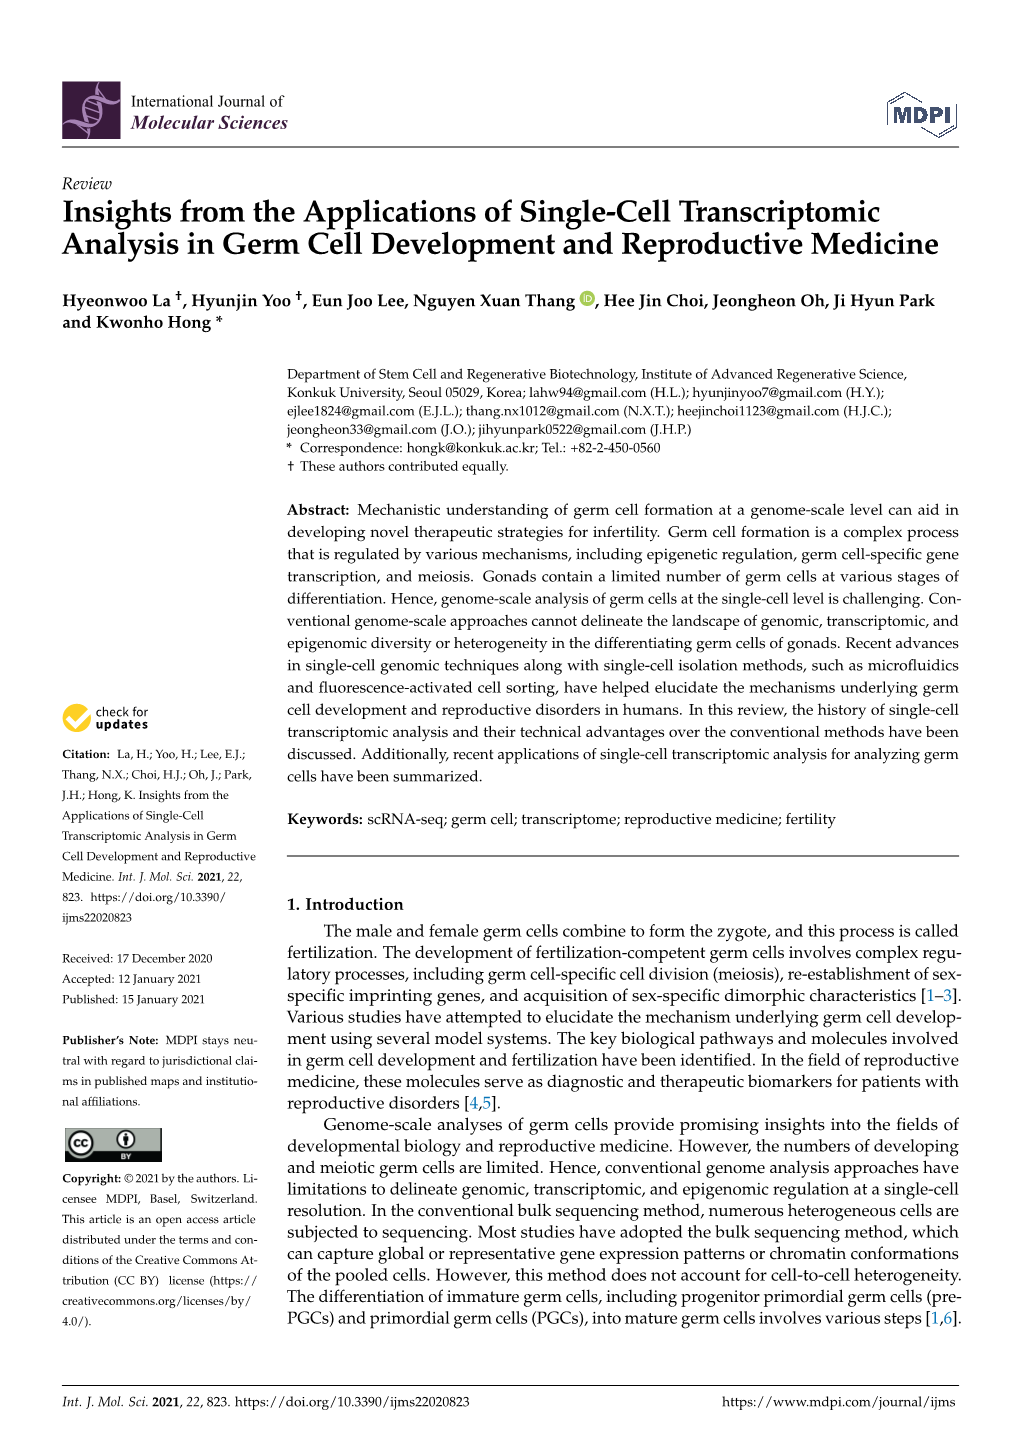 Insights from the Applications of Single-Cell Transcriptomic Analysis in Germ Cell Development and Reproductive Medicine